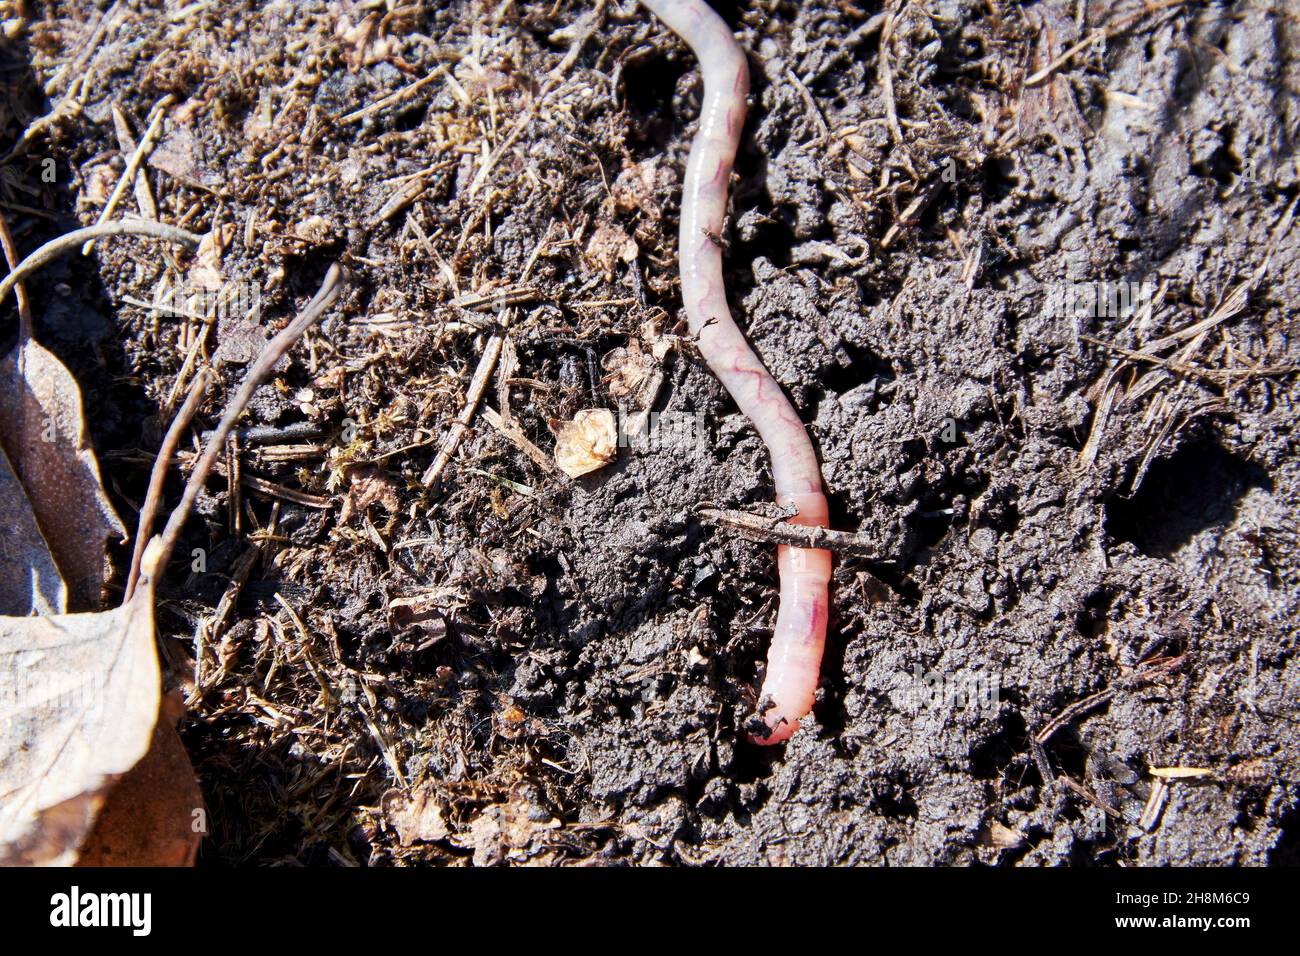 Earthworm crawling on damp spring ground. Animals backgrounds Stock Photo